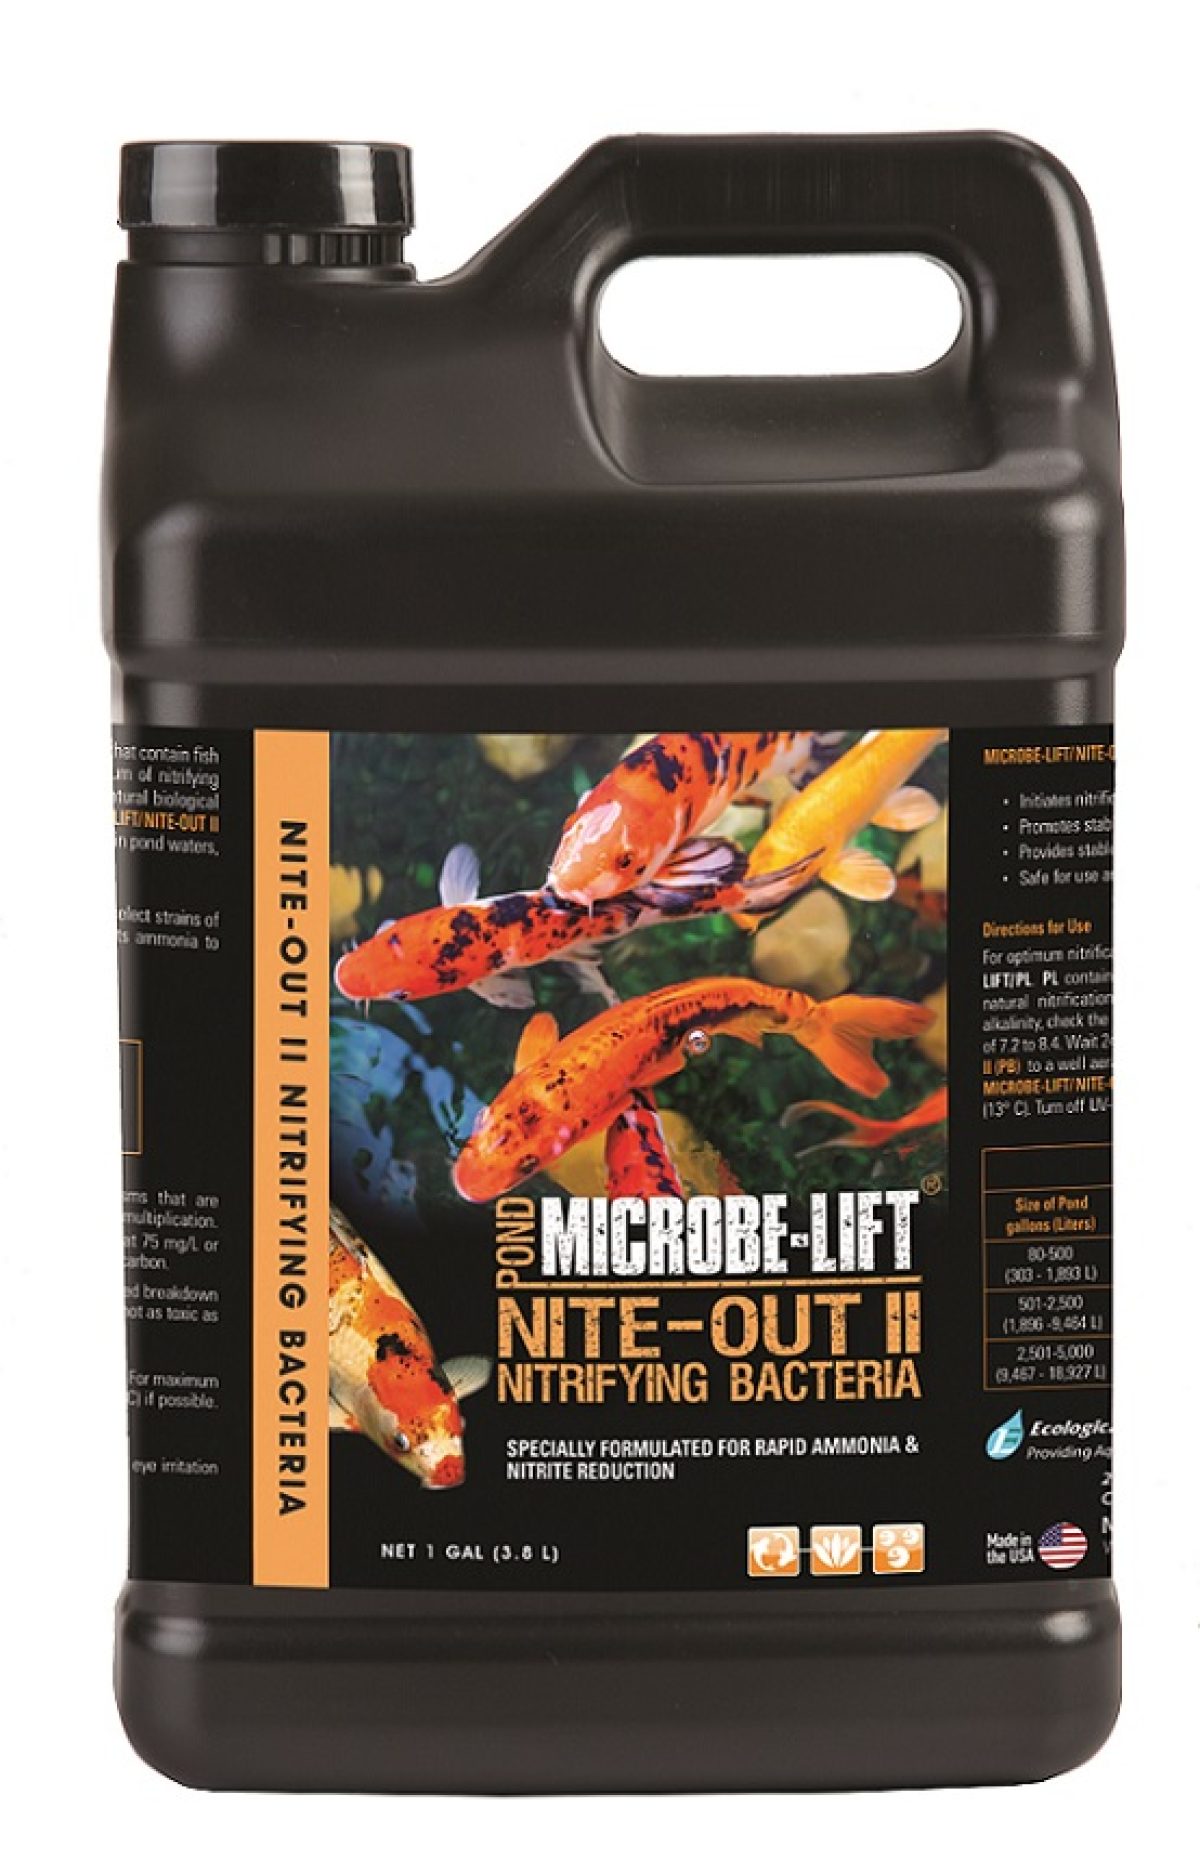  MICROBE-LIFT NITEH16 Nite-Out II Aquarium and Fish Tank  Cleaner for Rapid Ammonia and Nitrite Reduction, Freshwater and Saltwater,  16 Ounces : Aquarium Treatments : Pet Supplies